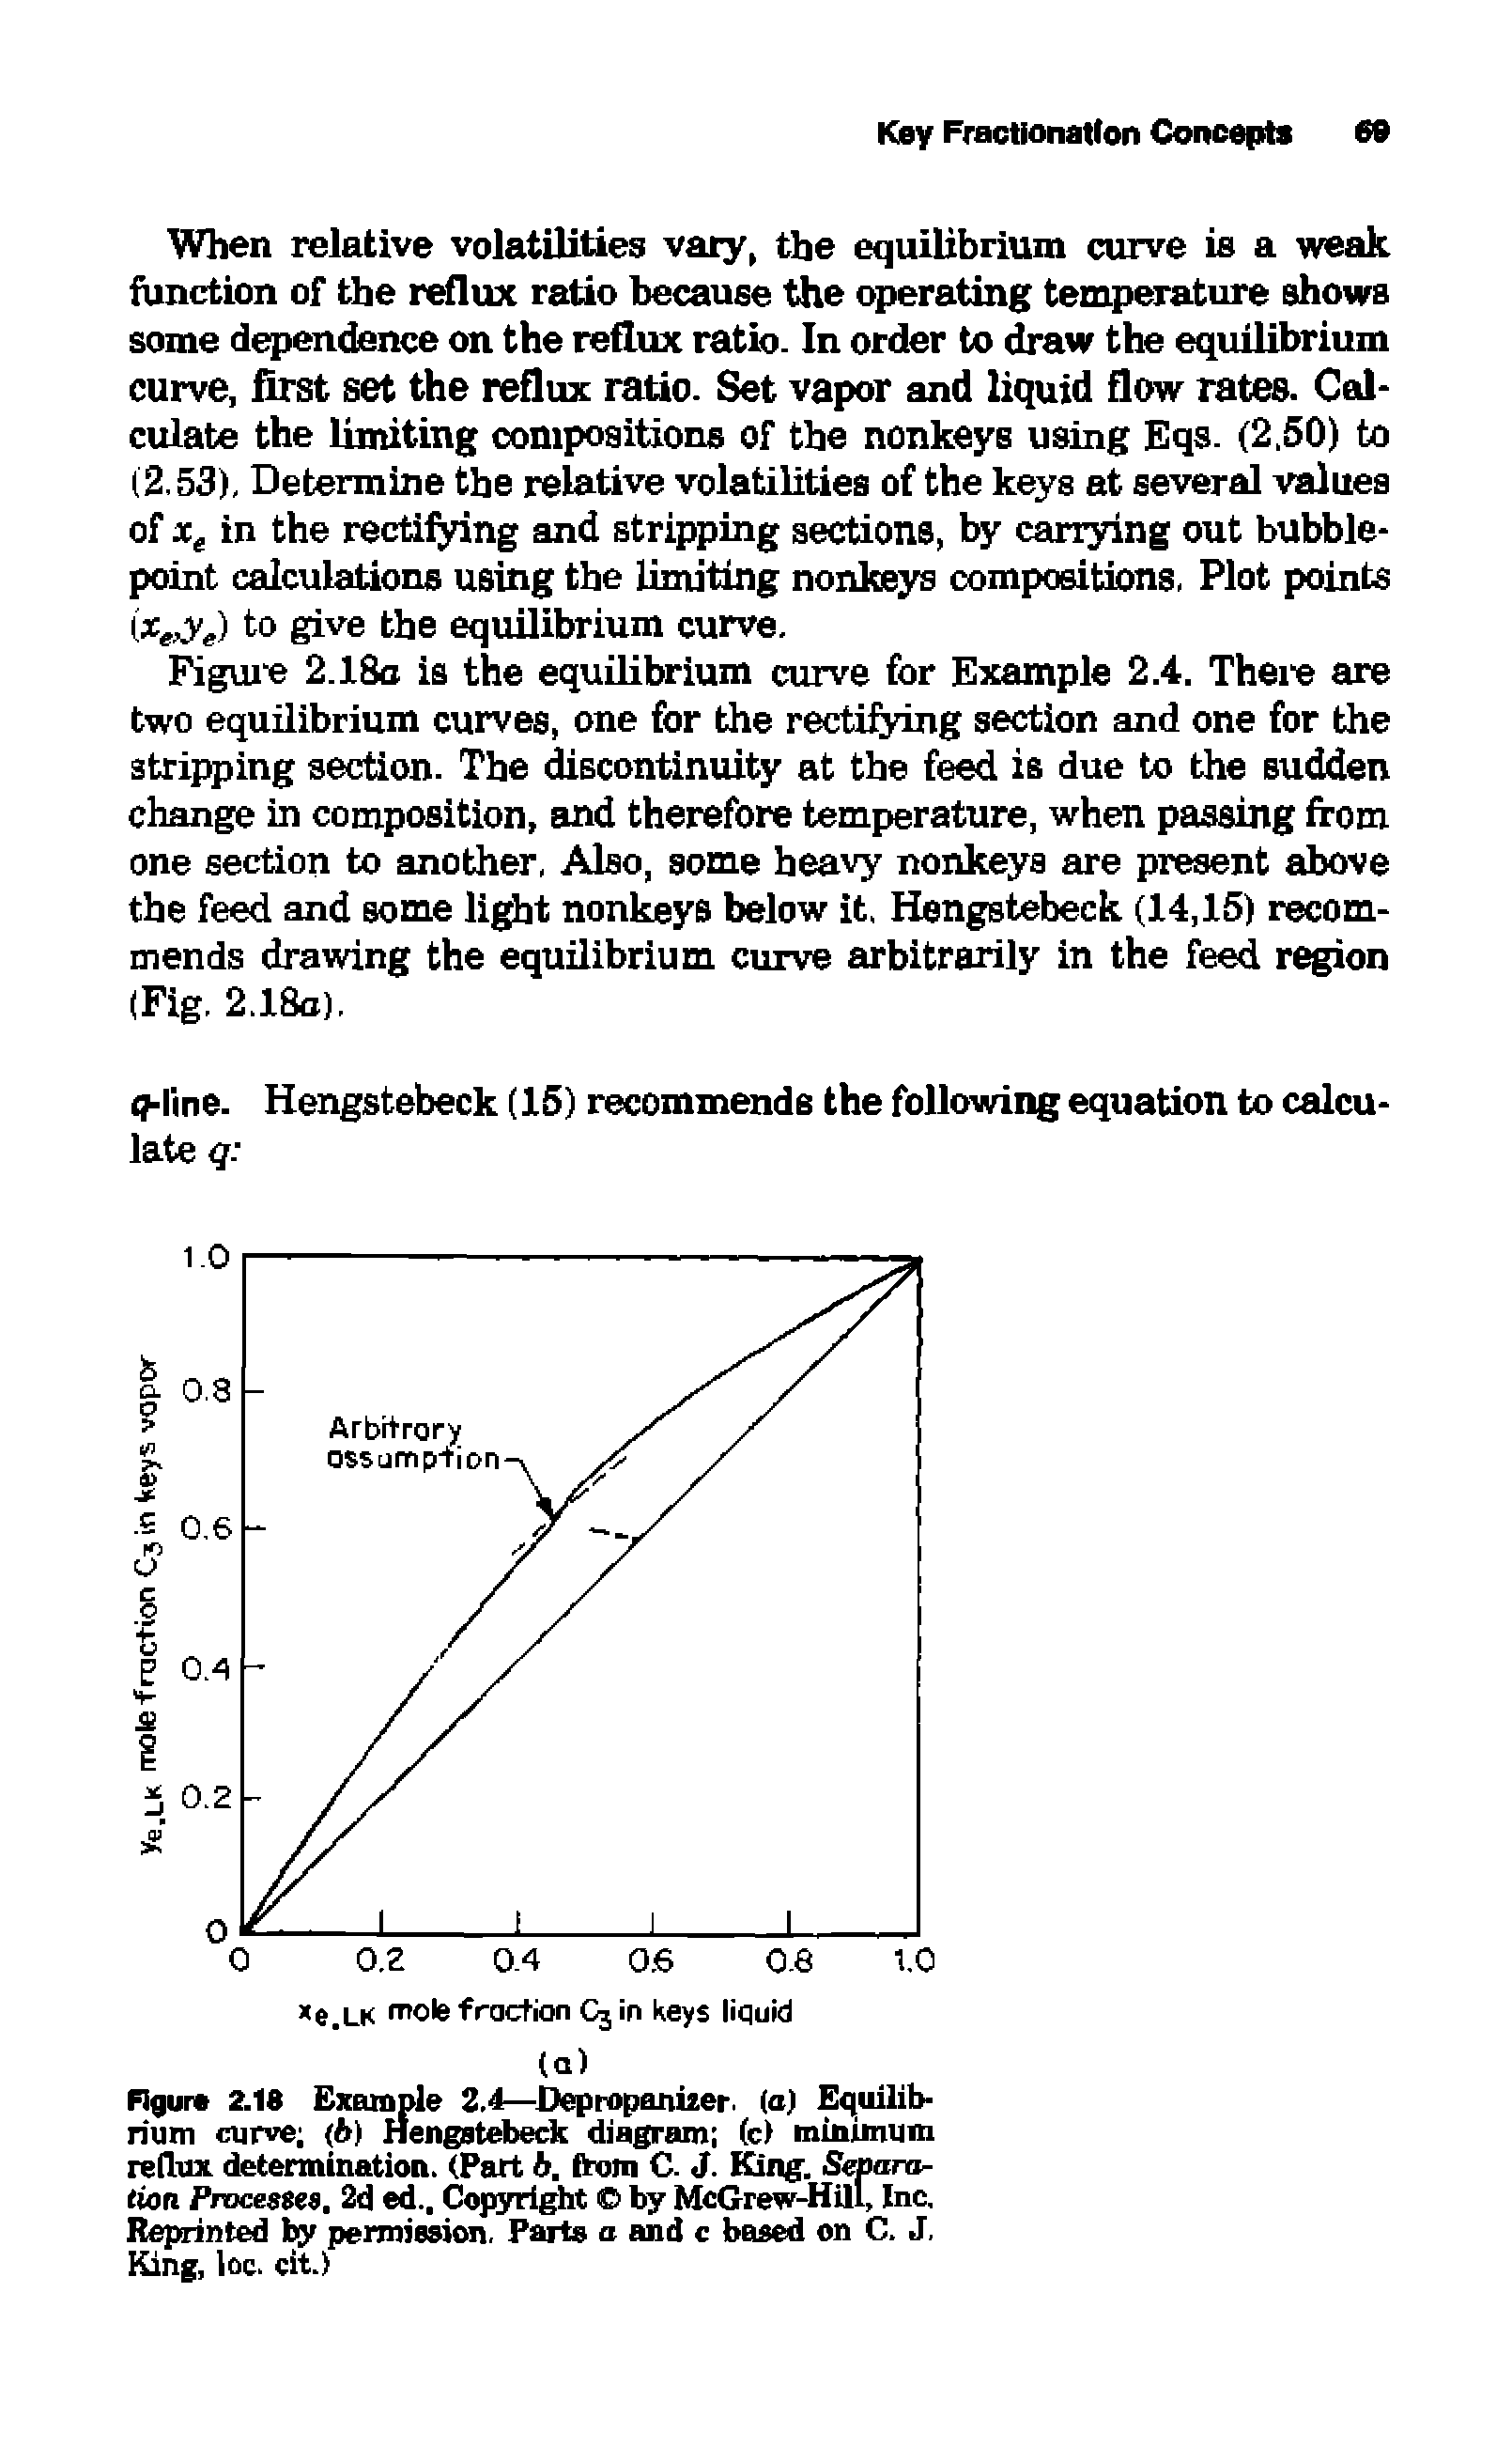 Figure 2.18 Example 2A—Depropanizer (a) Equilibrium curve (b) Hengstebeck diagram (c) minimum reflux determination. (Part b. from C. J. King Separation Processes, 2d ed.. Copyright by McGrew-Hill, Inc. Reprinted by permission. Parts a and c based on C. J, King, loc. cit.)...